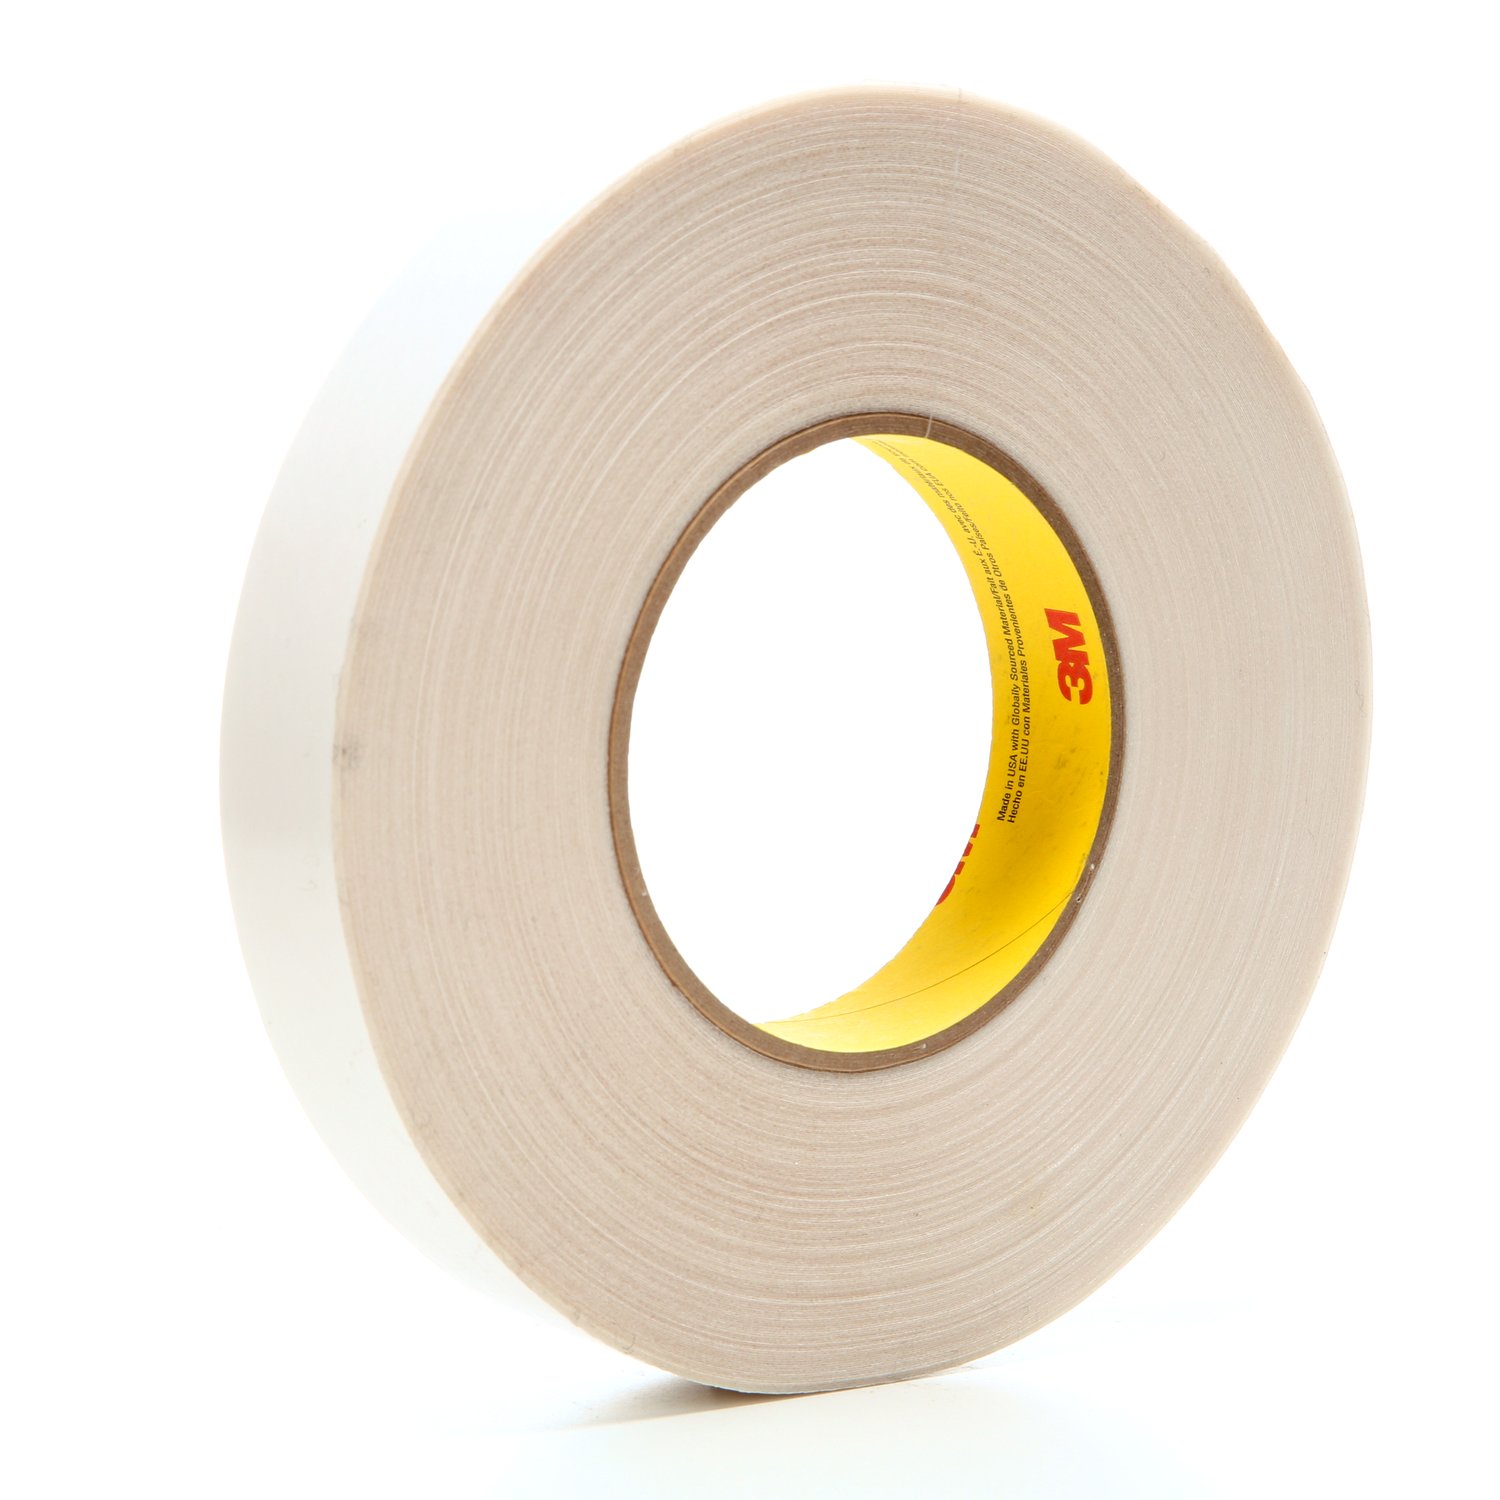 7000124336 - 3M Double Coated Tape 9741, Clear, 24 mm x 55 m, 6.5 mil, 48 rolls per
case